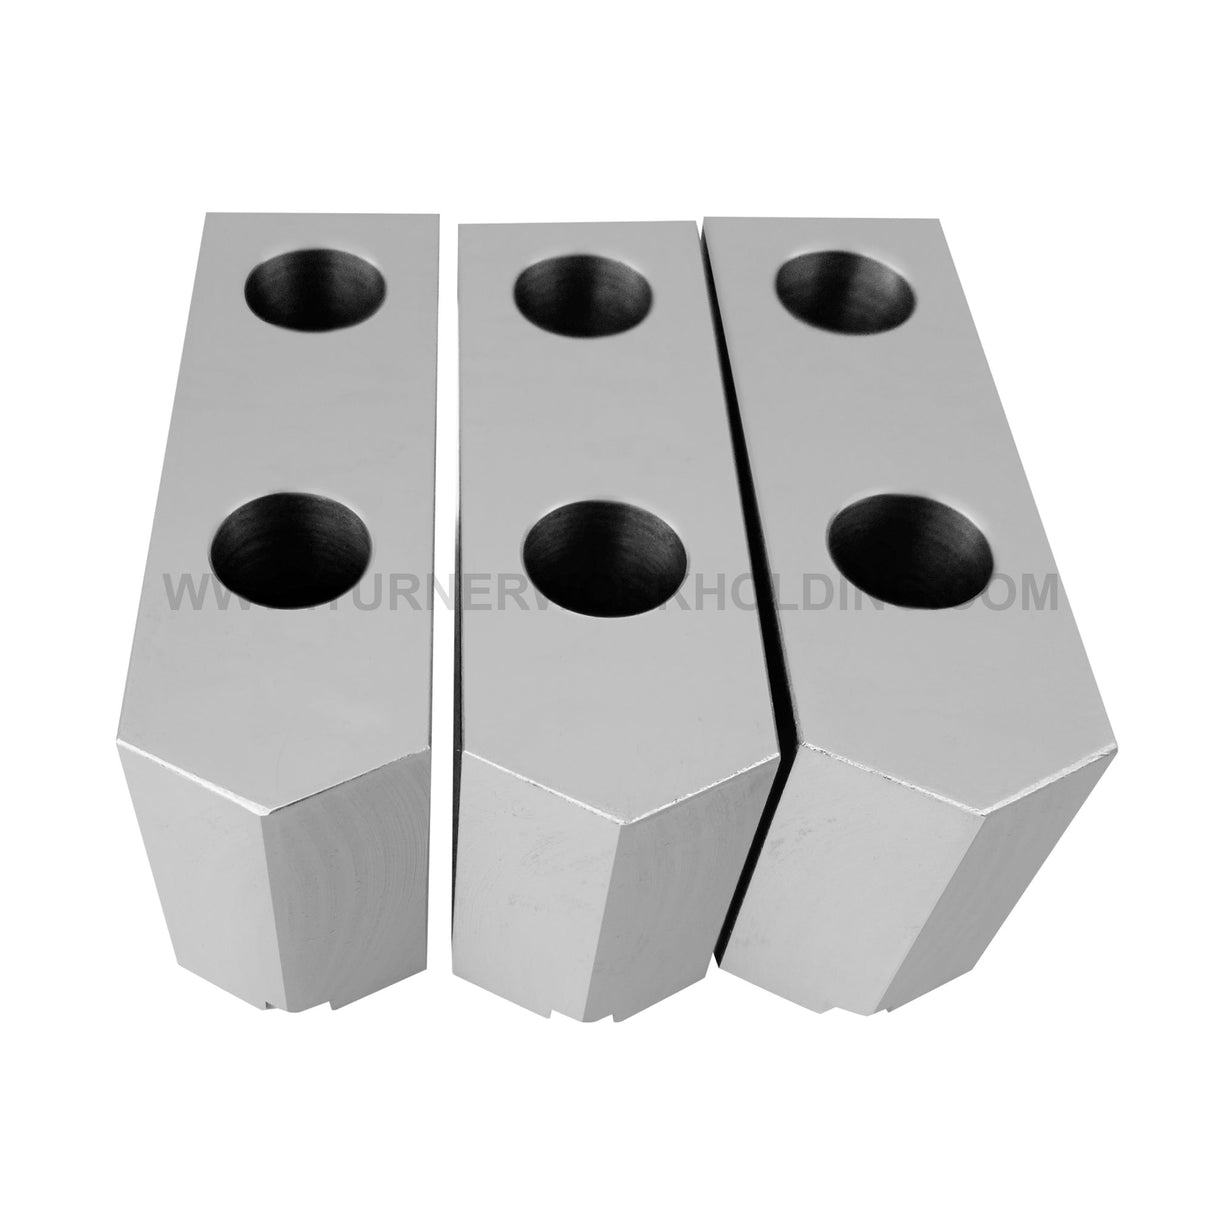 TG-12C-2.0-AP - AMERICAN STANDARD ALUMINUM SOFT JAWS FOR TONGUE & GROOVE 12" CHUCK 2.0" HT (3 PC)